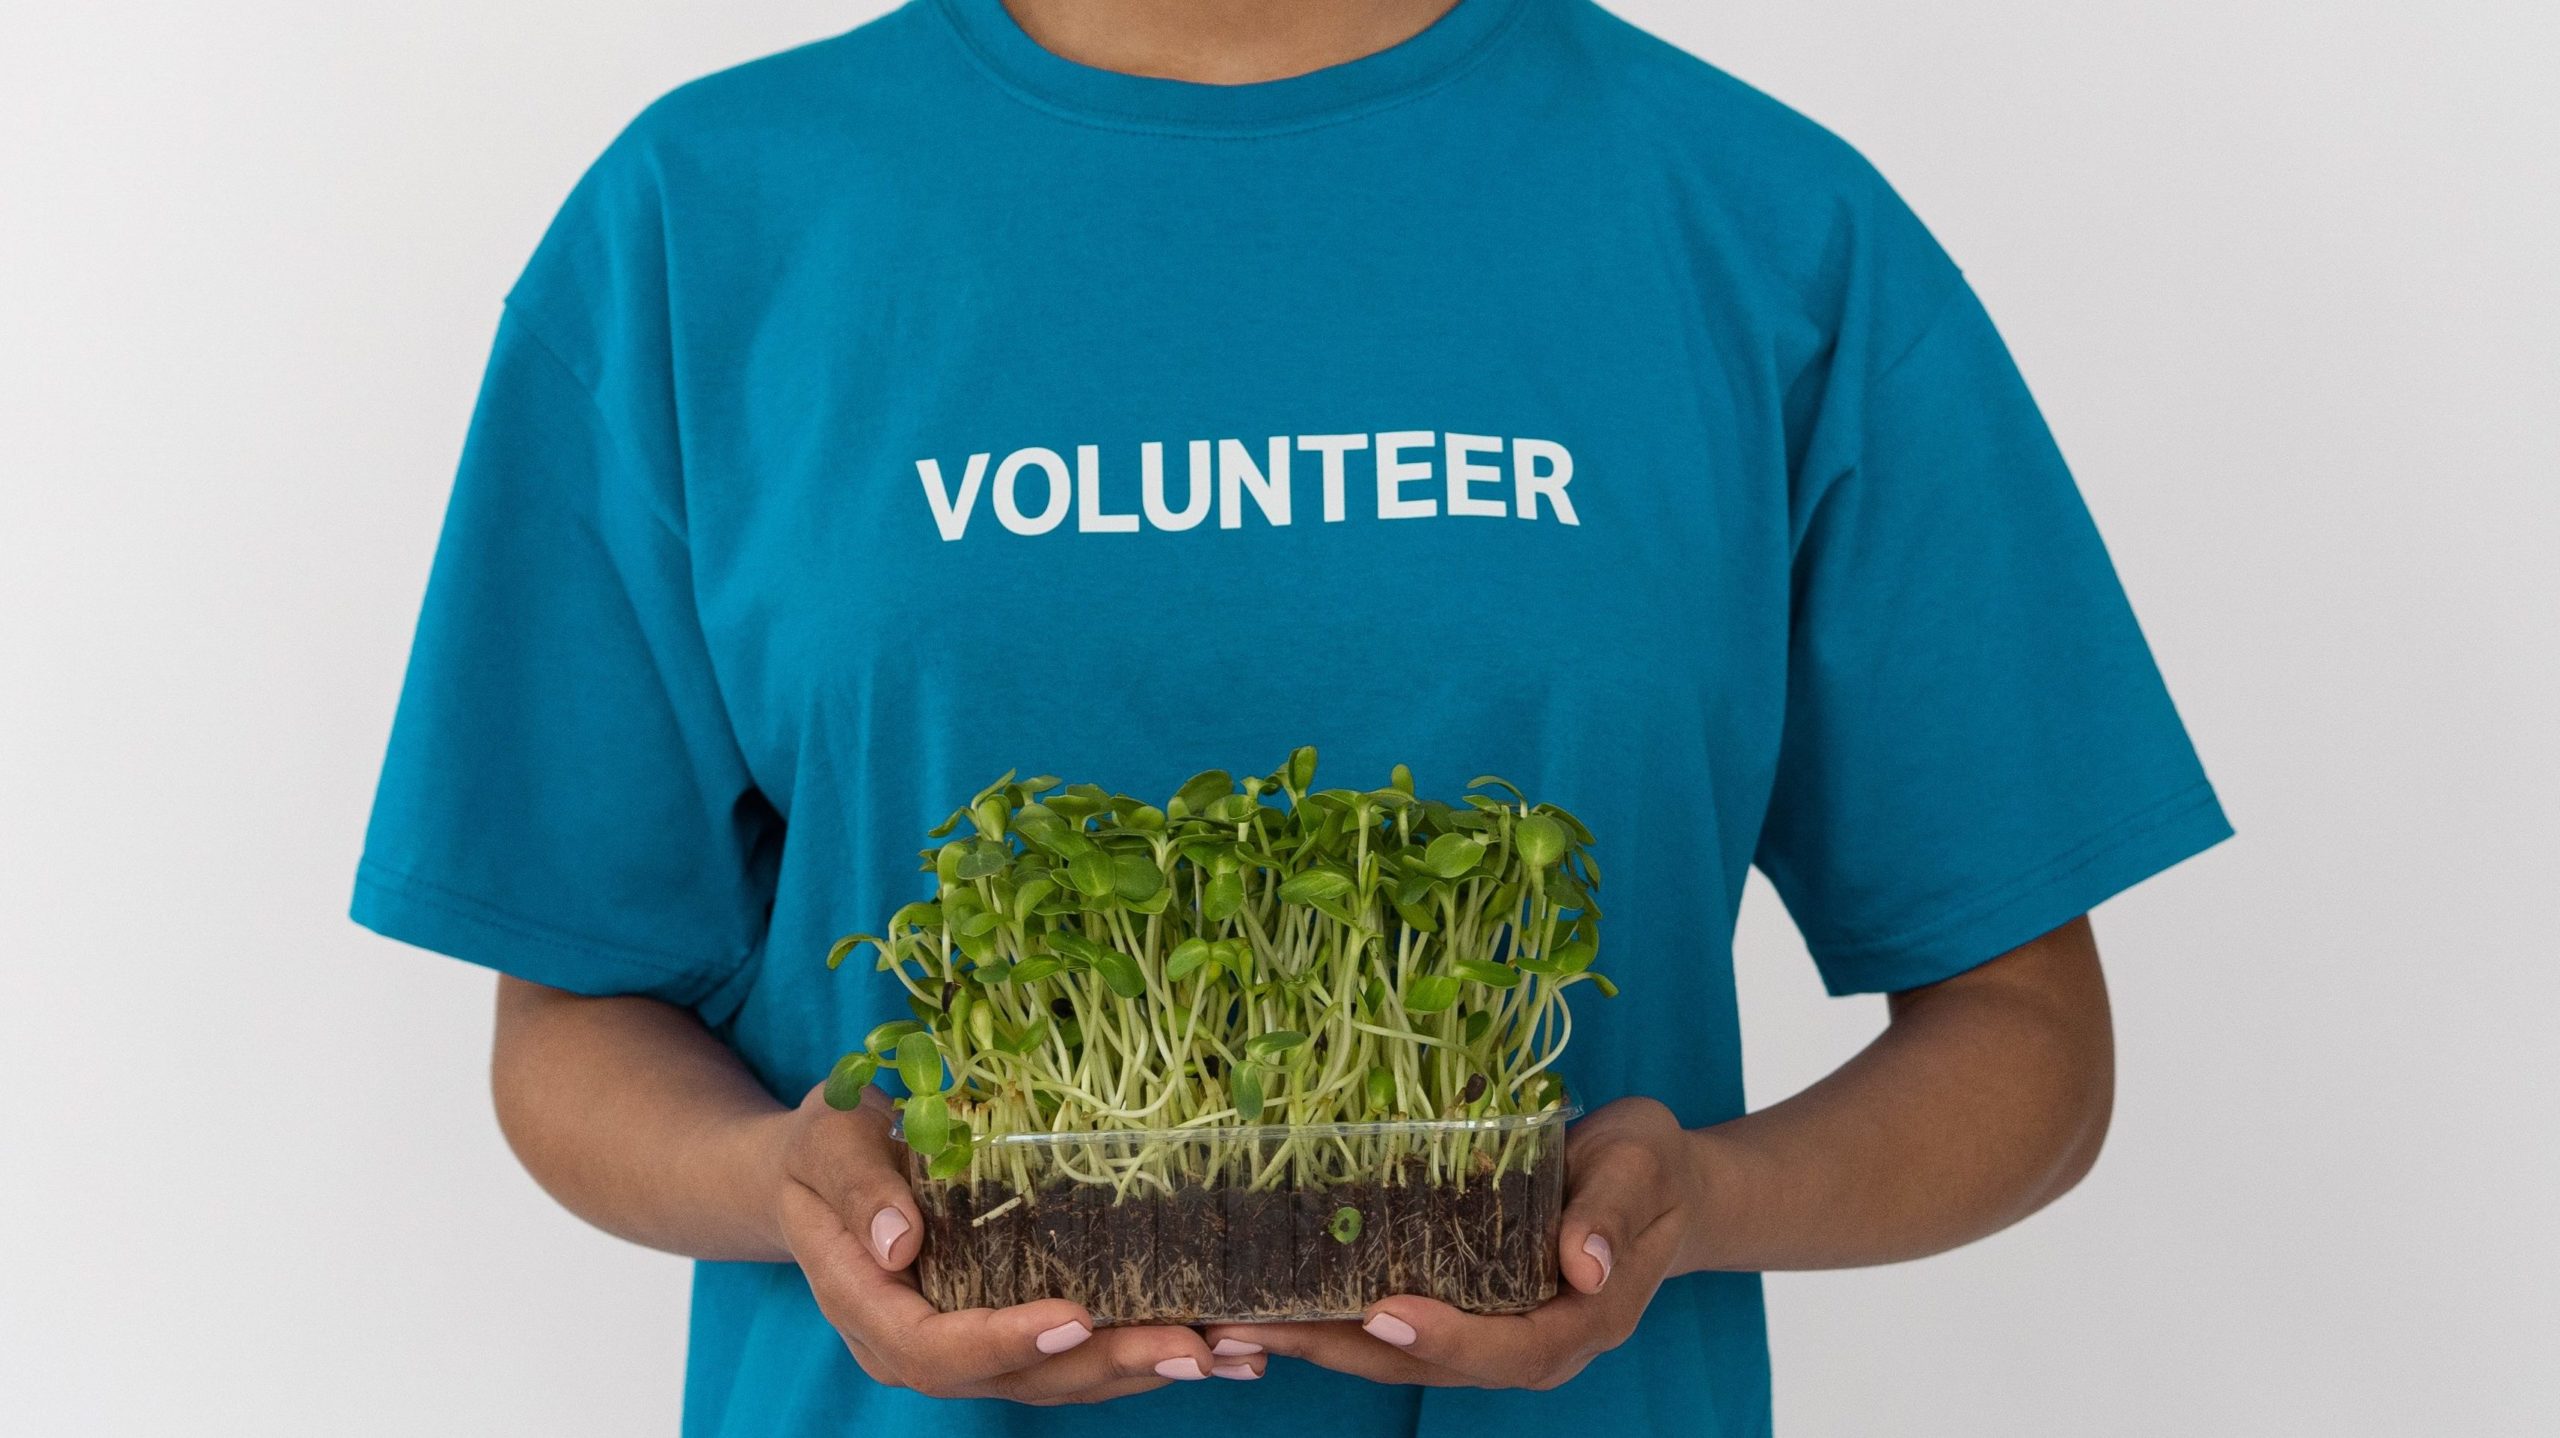 Photo of person in a shirt saying 'volunteer' and holding a container with plants.